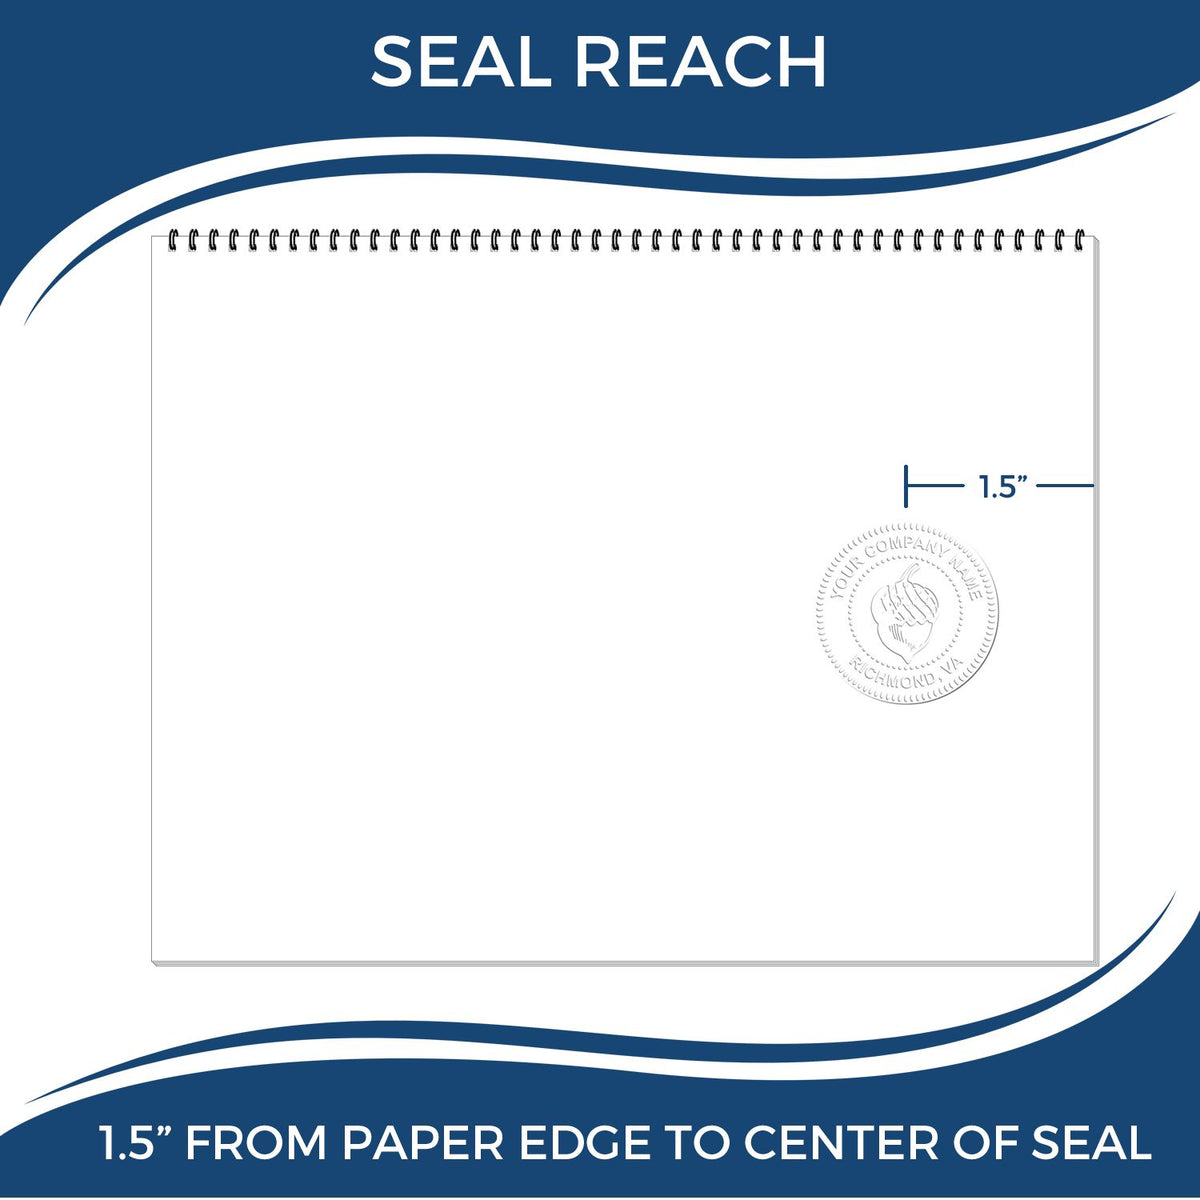 An infographic showing the seal reach which is represented by a ruler and a miniature seal image of the Gift Utah Geologist Seal